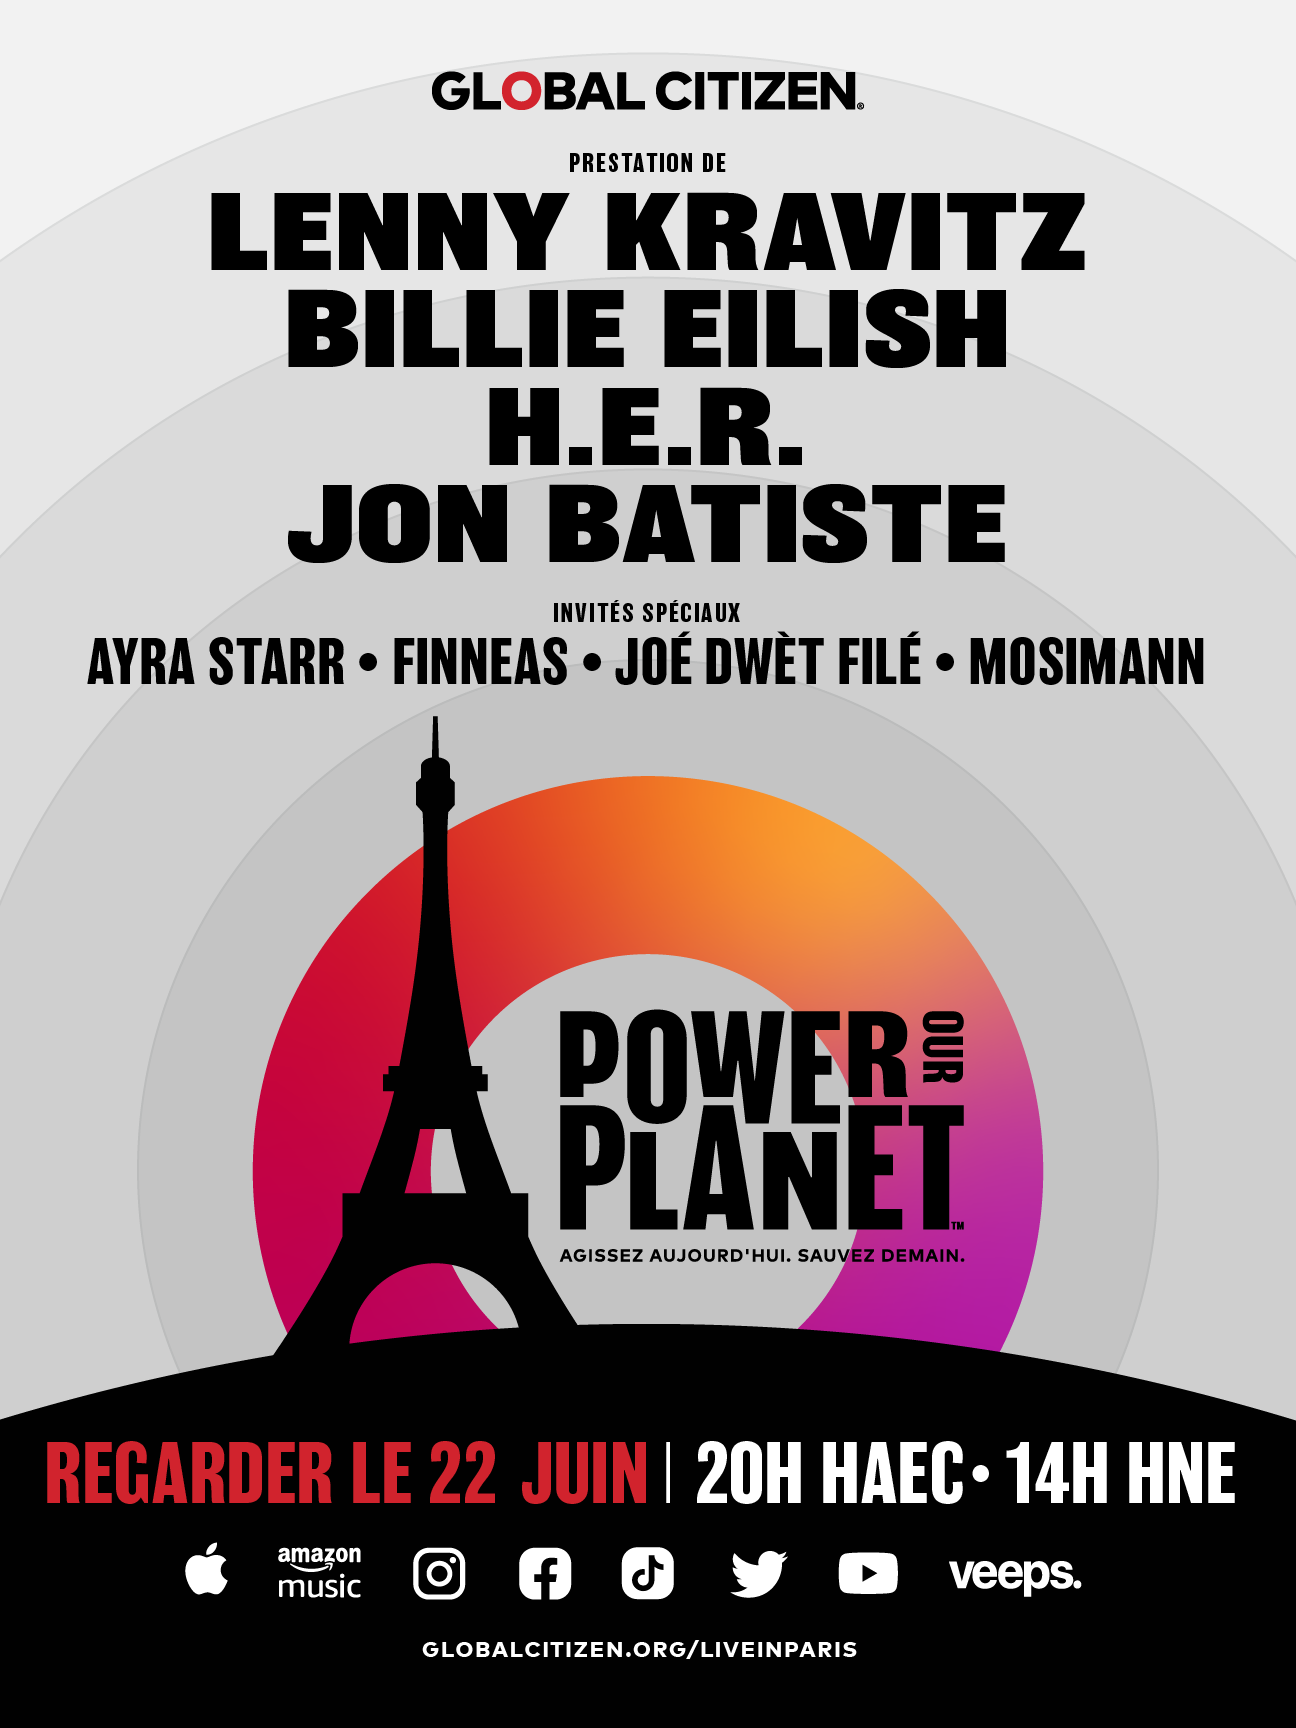 Power Our Planet: Live in Paris